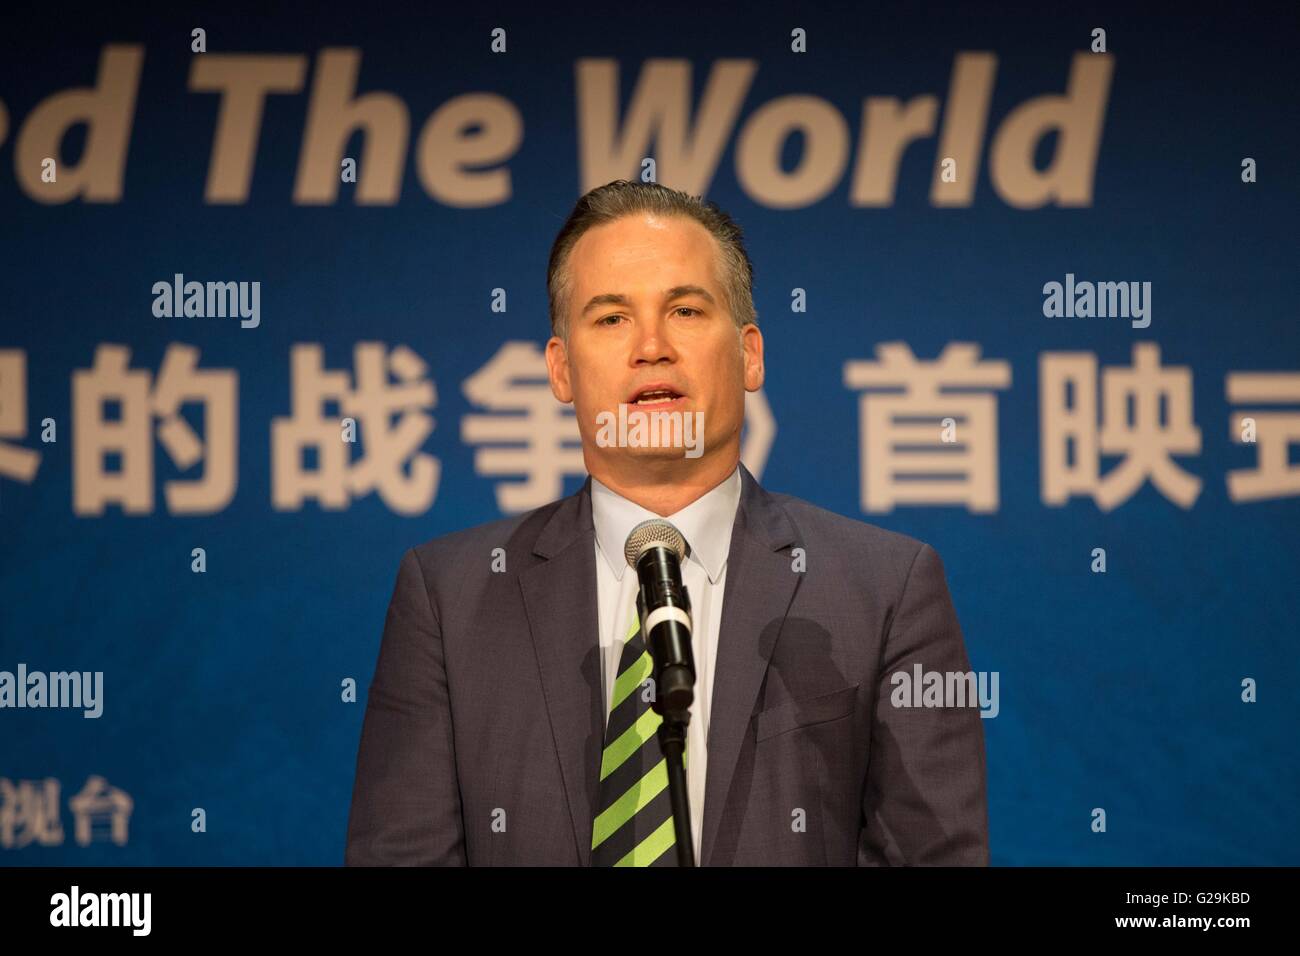 Sydney, Australia. 27th May, 2016. Jim Buchan, general manager of Foxtel's Factual Channels, speaks at the premiere ceremony of a documentary titled 'The War That Changed the World: Making of a New China,' in Sydney, Australia, May 27, 2016. Australians will be able to see the true horrors of the Second World War (WWII) in China when a joint China-Australia documentary airs on local television in September. Credit:  Zhu Hongye/Xinhua/Alamy Live News Stock Photo